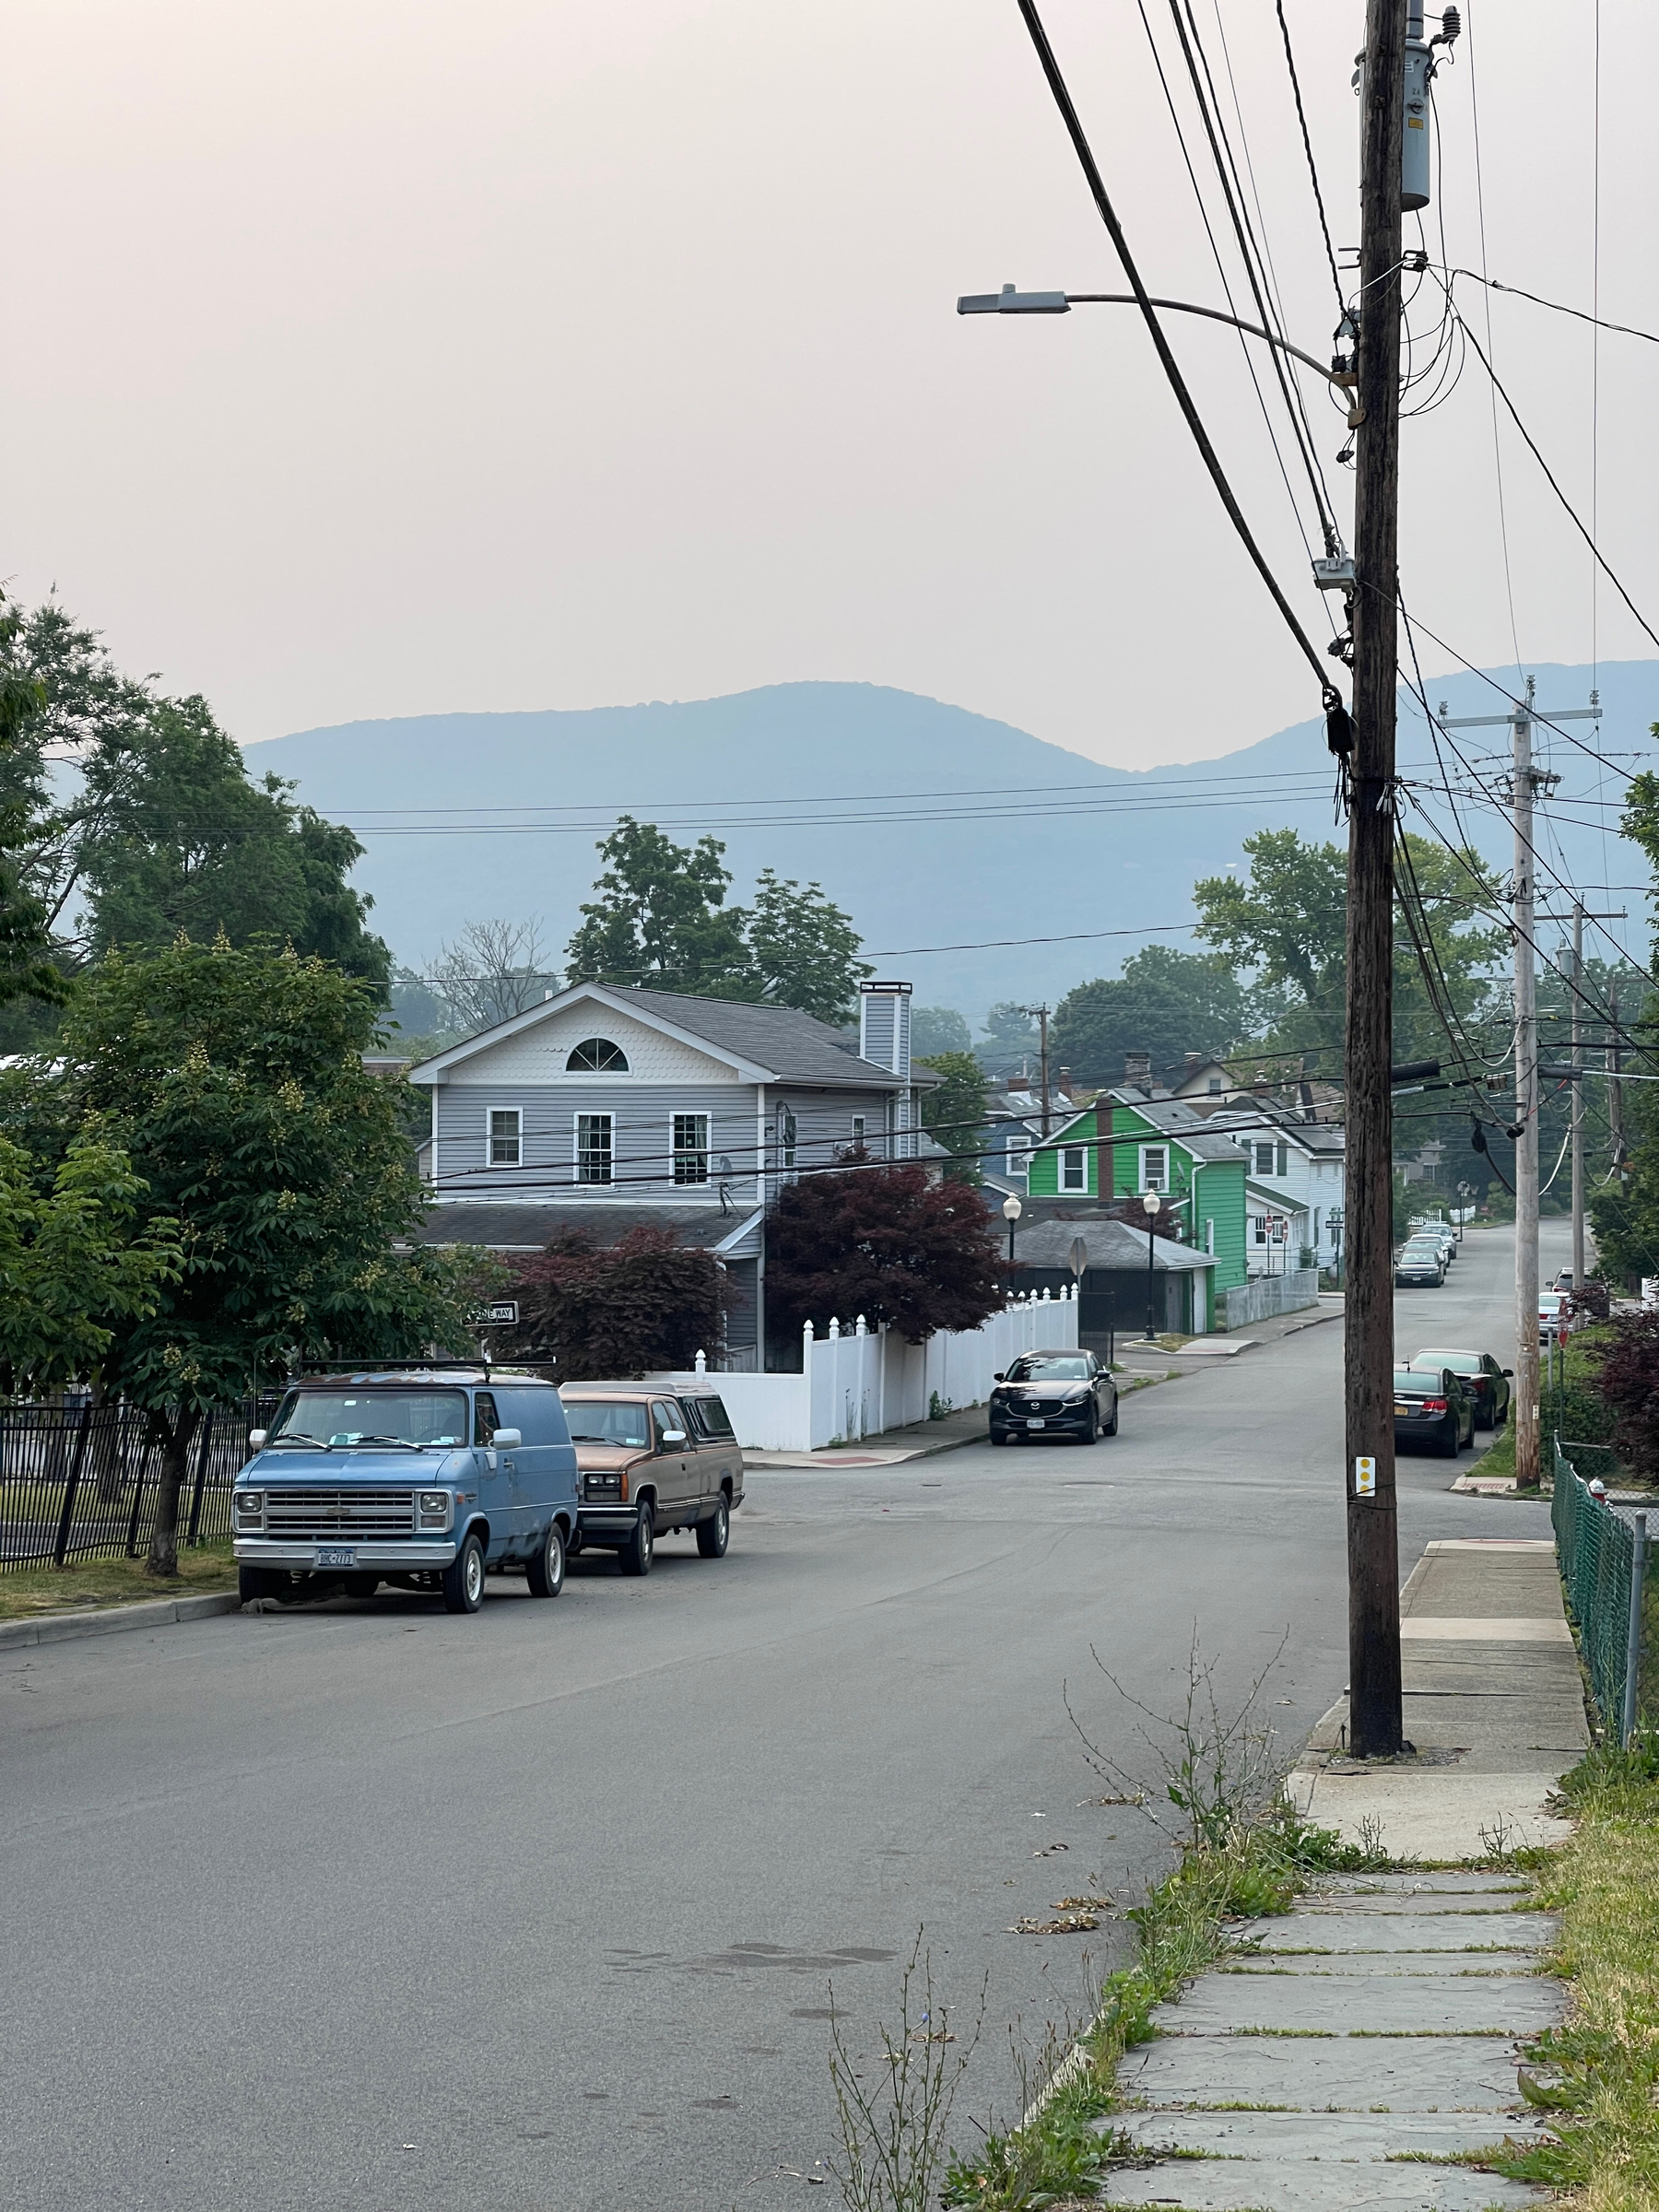 Streetscape with mountains in background obscured by haze from the Canadian wildfires.